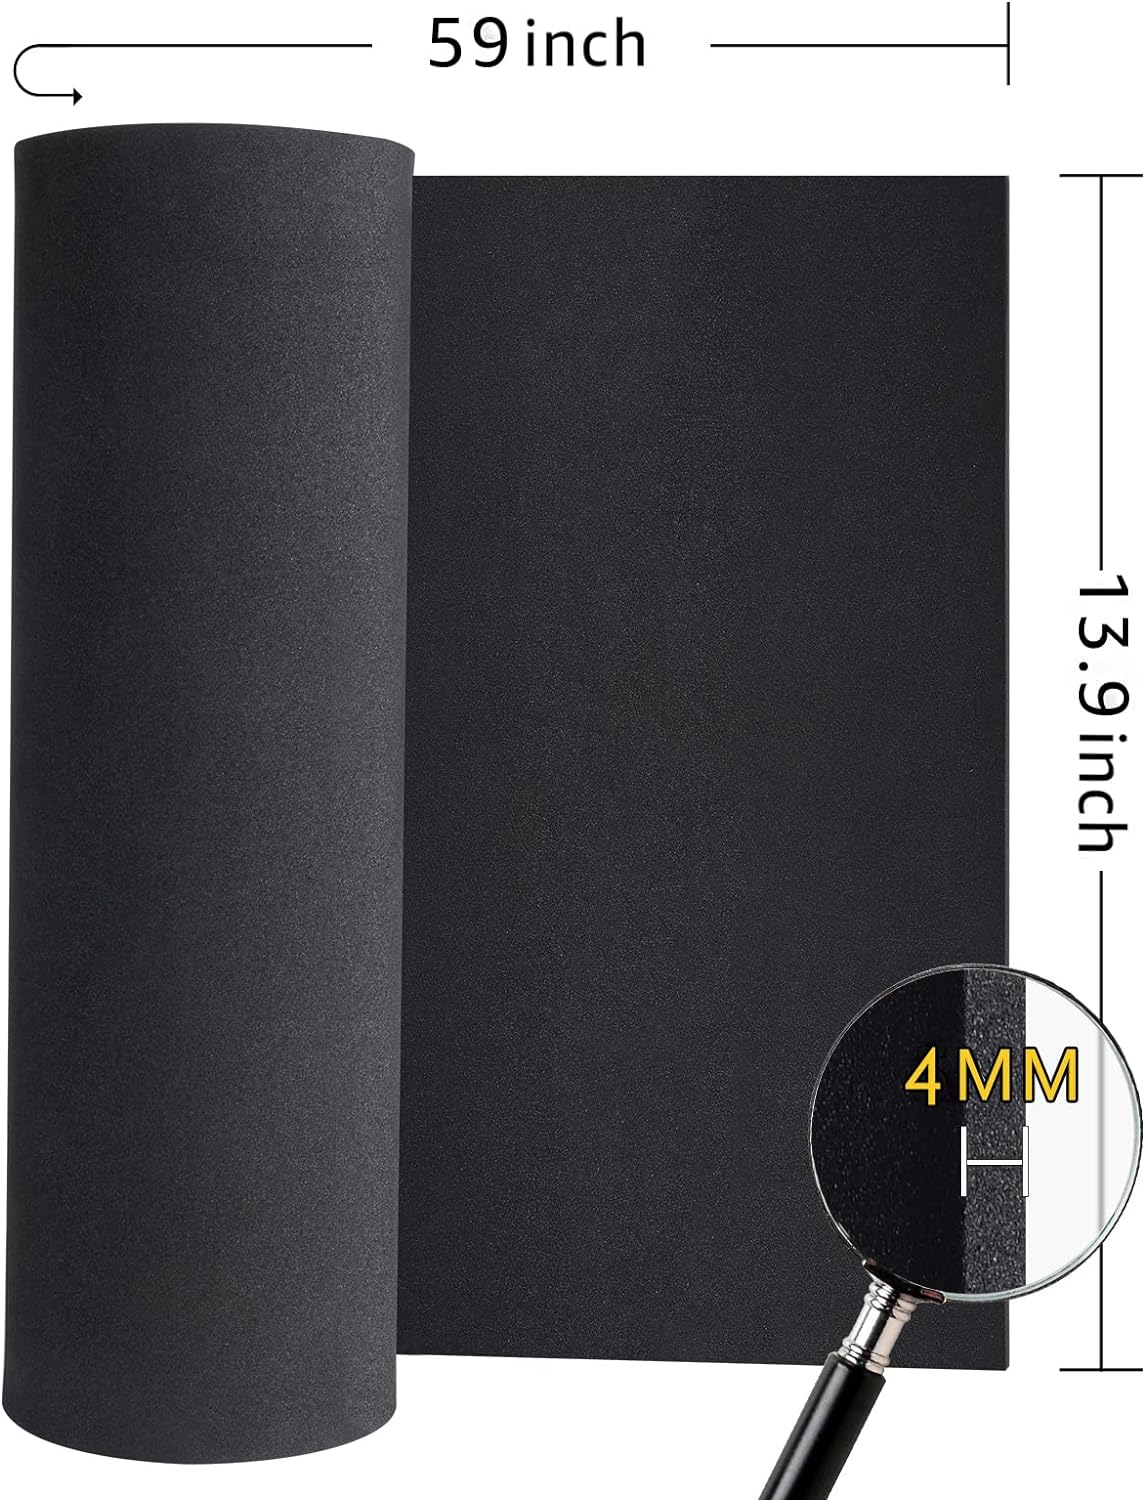 Black Foam Sheets Roll, Premium Cosplay EVA Foam Sheet，4mm Thick,59"x13.9",High Density 86kg/m3 for Cosplay Costume, Crafts, DIY Projects by PAIDU